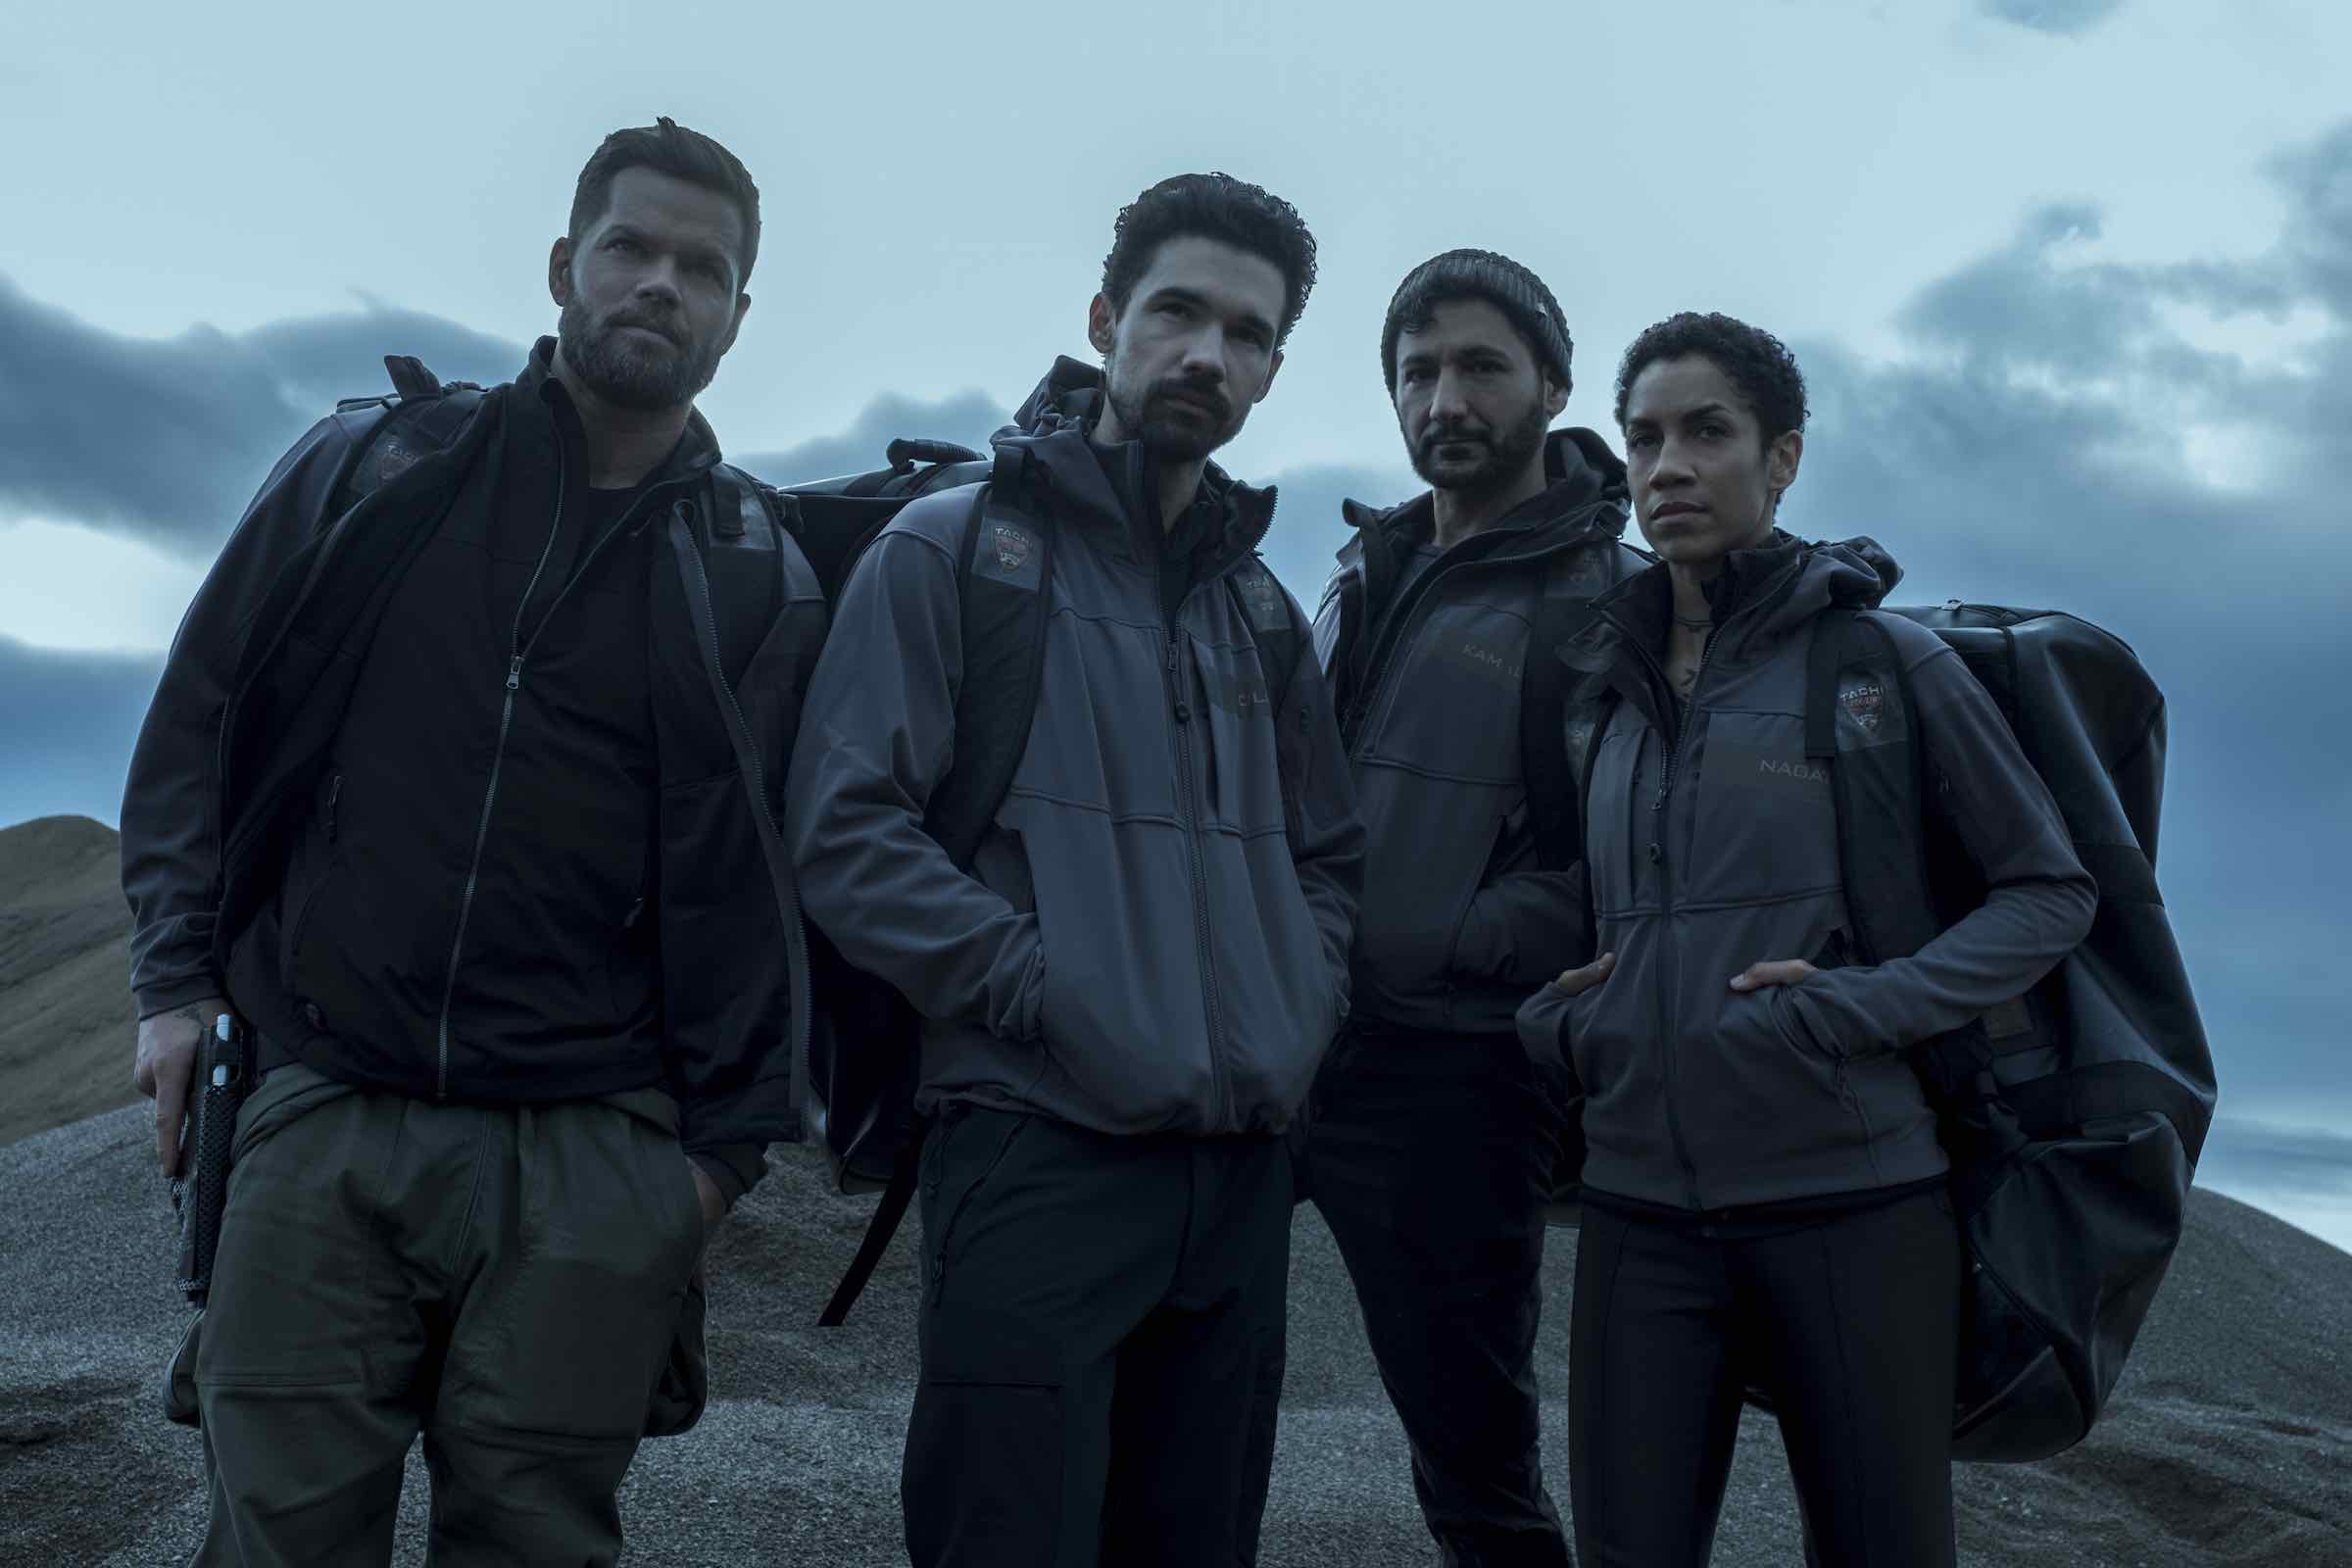 If you’re thinking about checking out 'The Expanse', then here’s everything you need to know about the show’s hard-won fourth season.